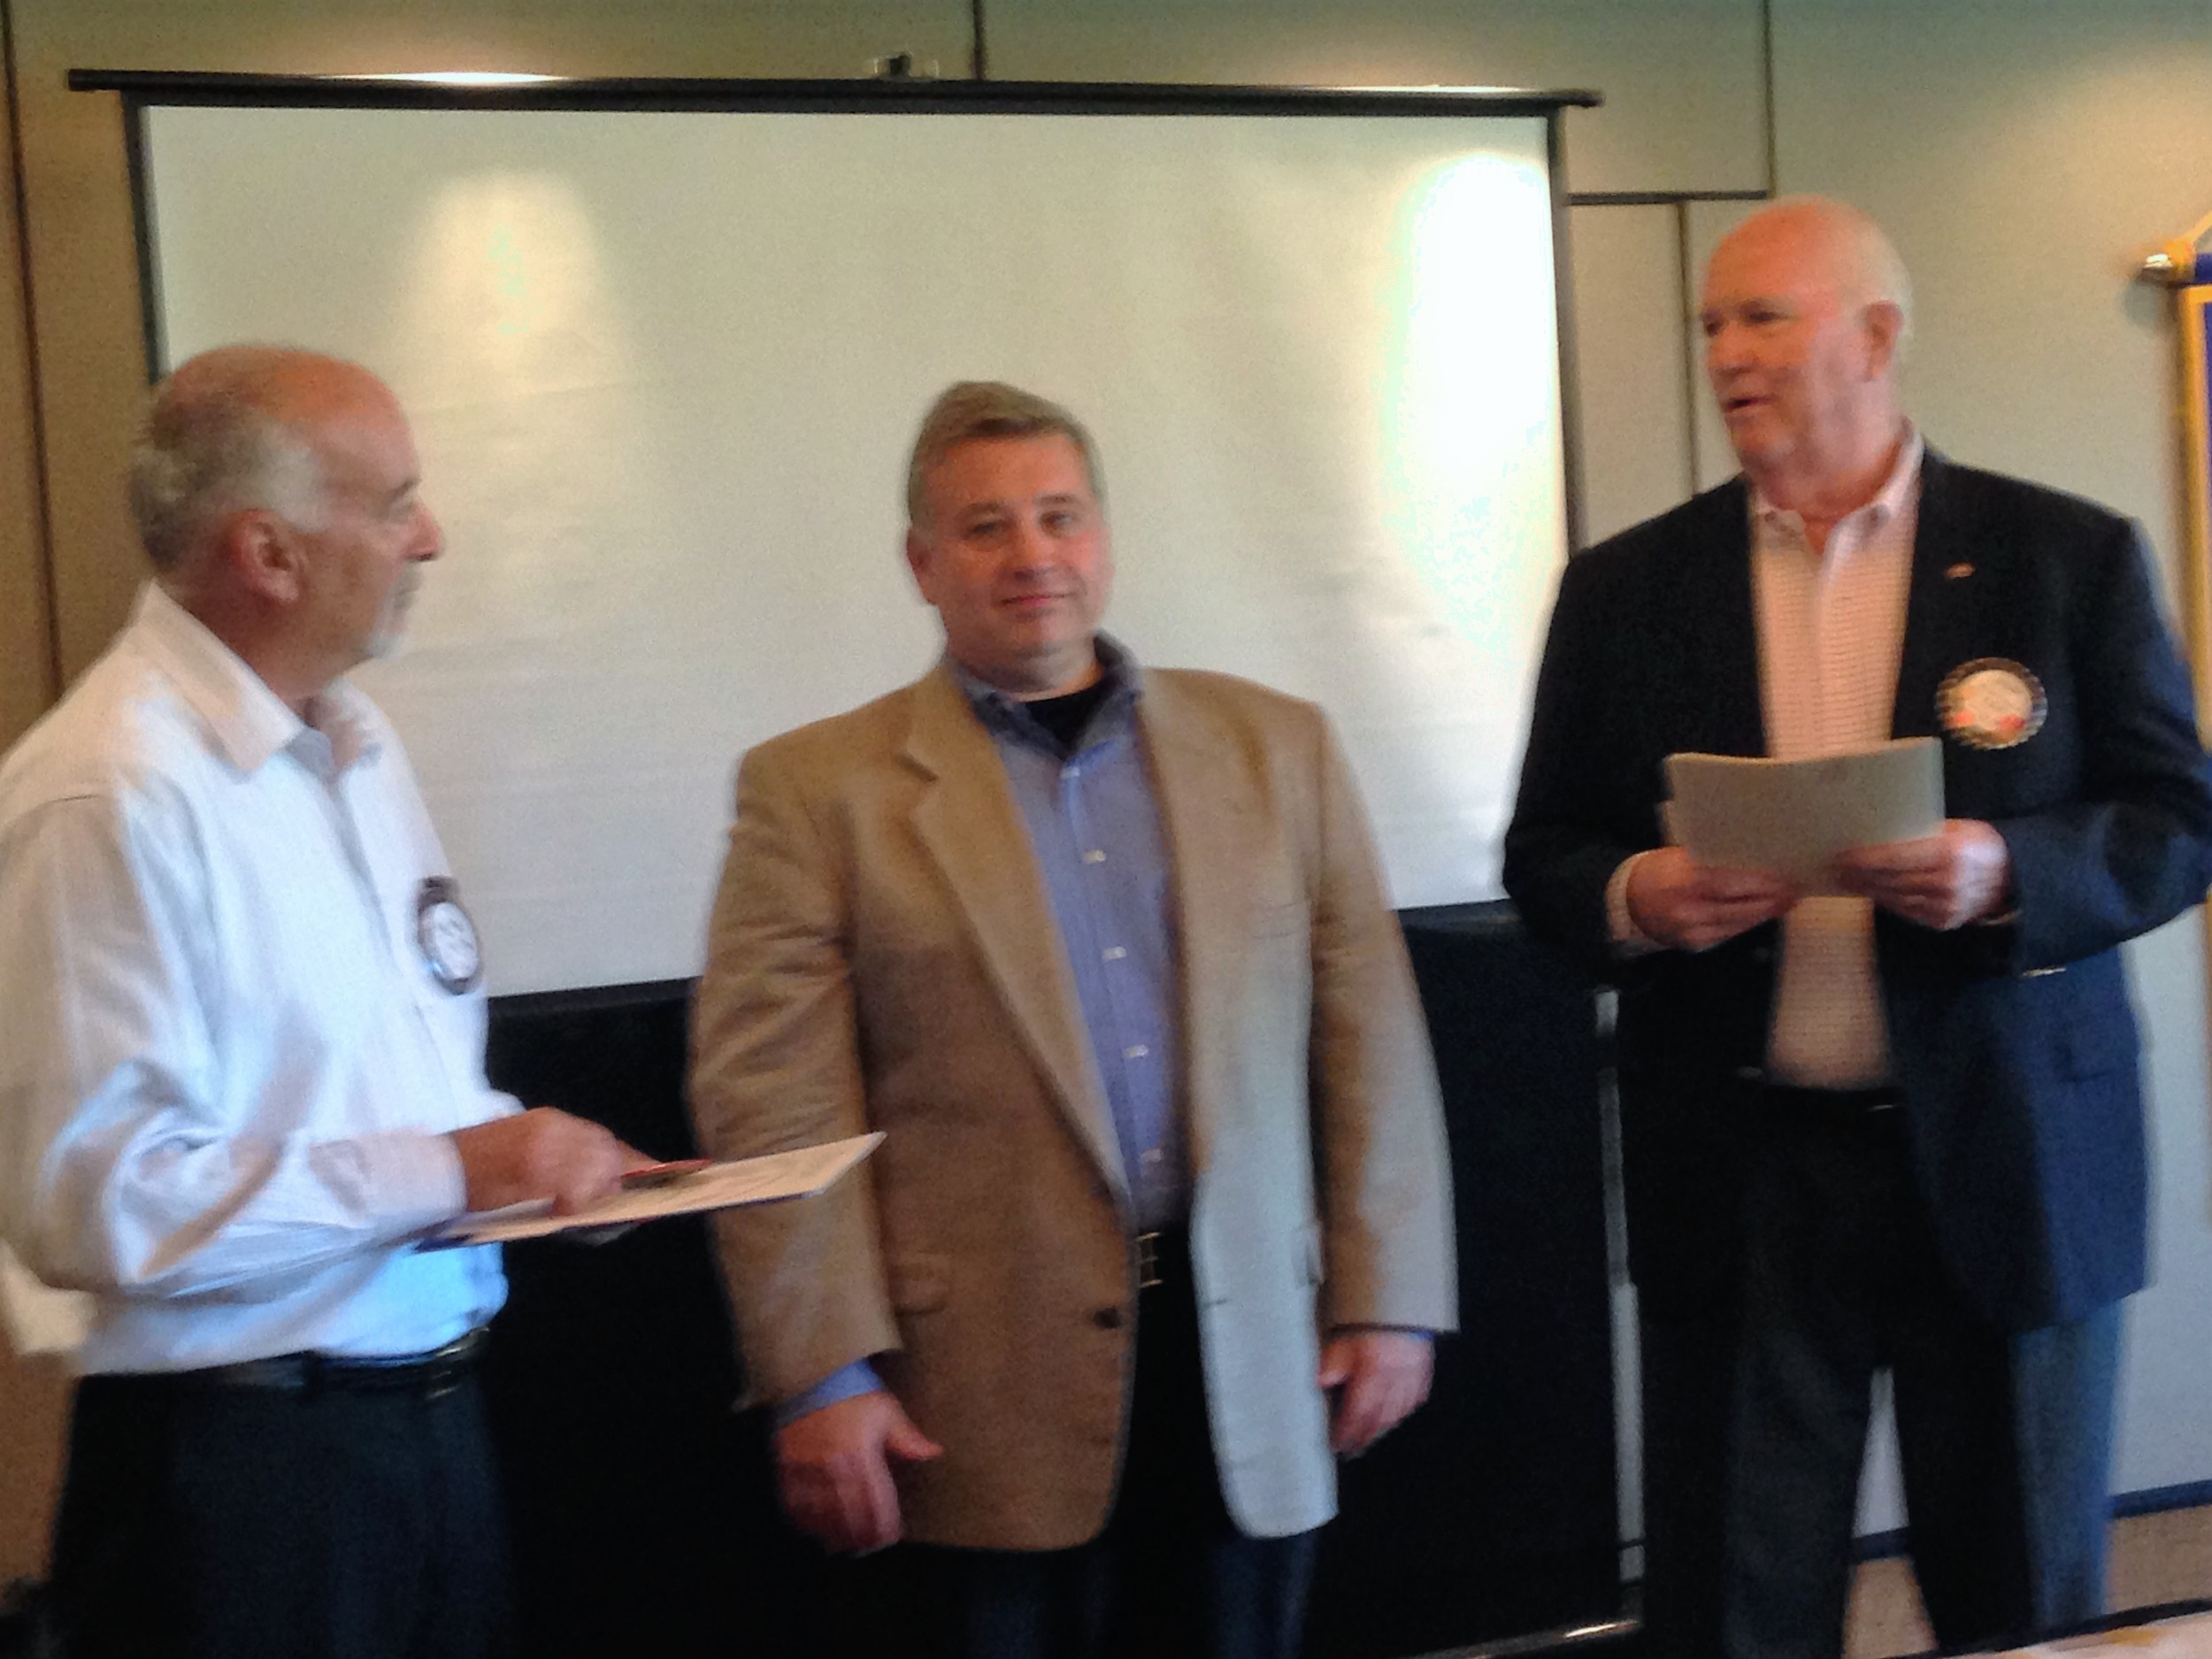 Bruce Barber (right) inducts Marc Ressler (center) into the Rotary Club as sponsor Vincent Grassia looks on.